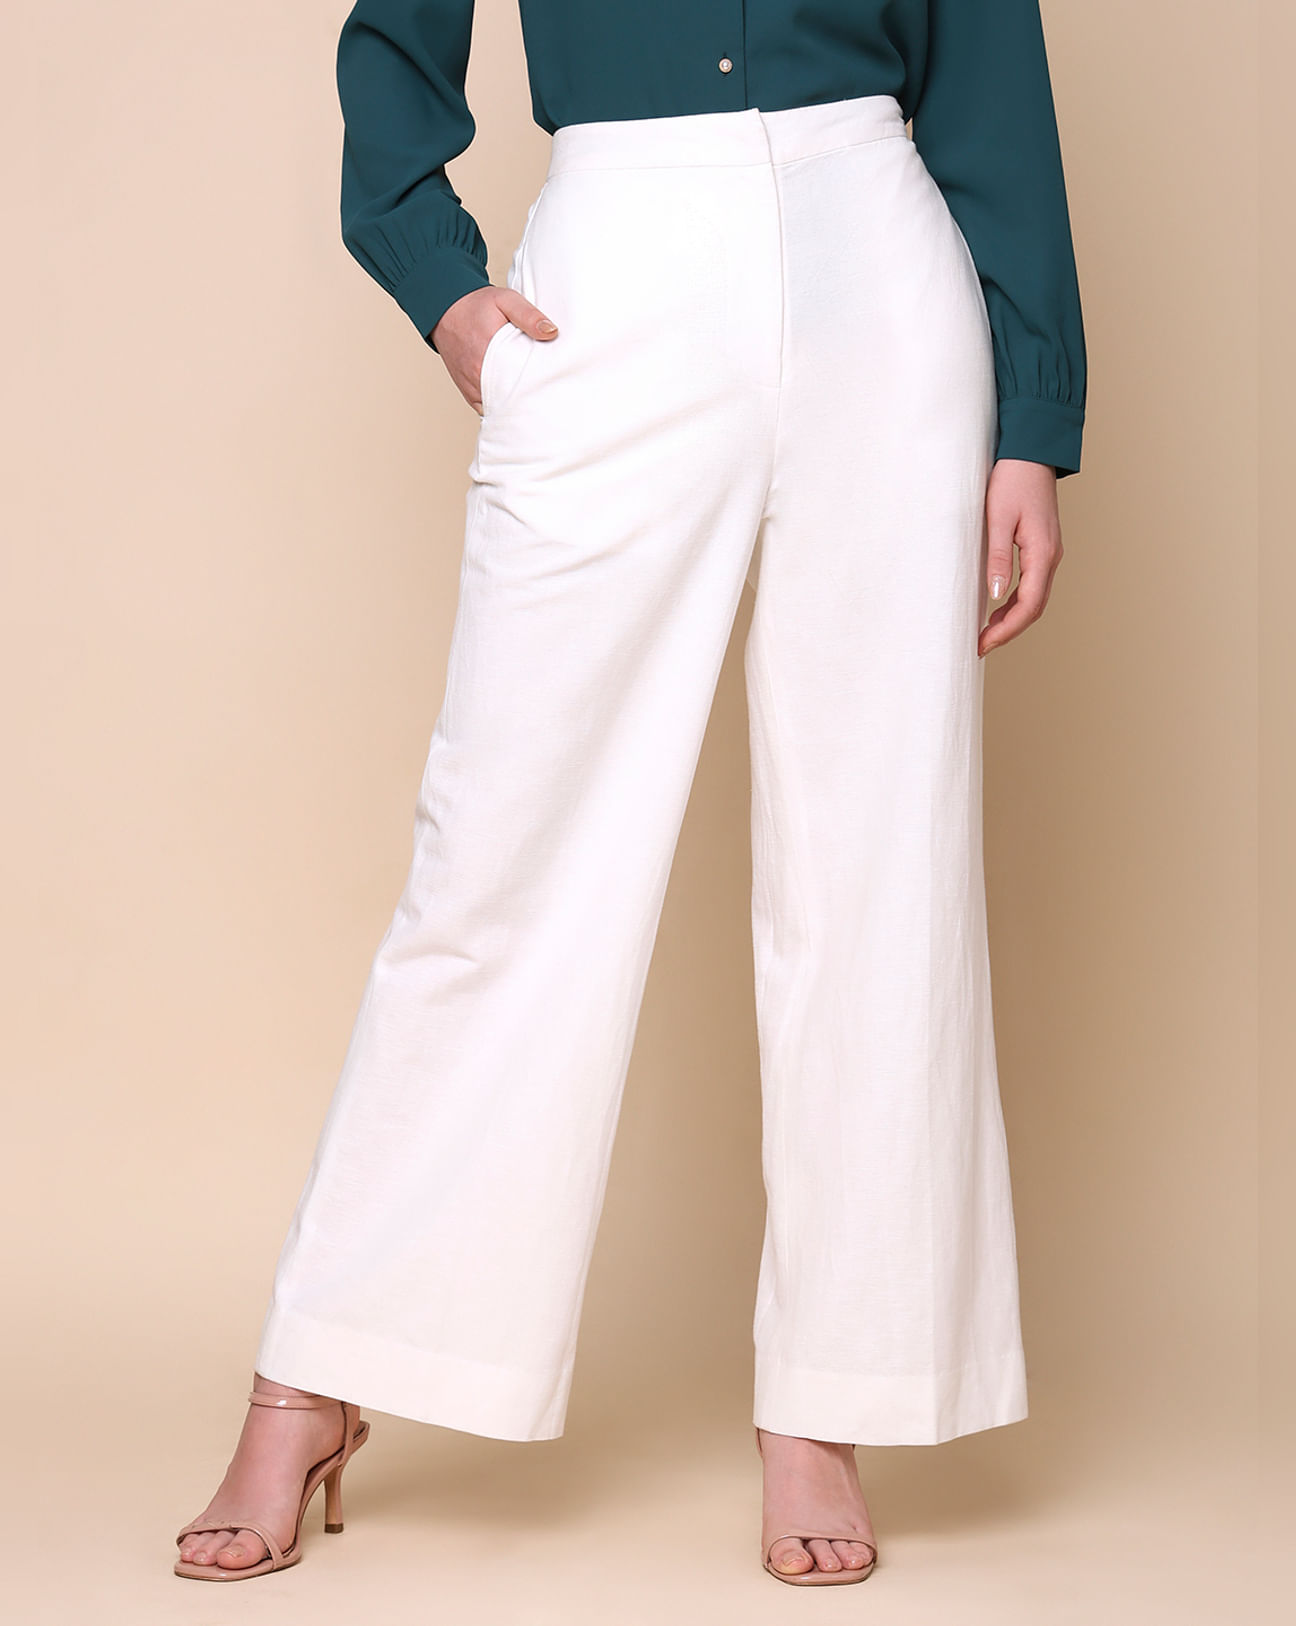 Flared Rise White Mid Pants